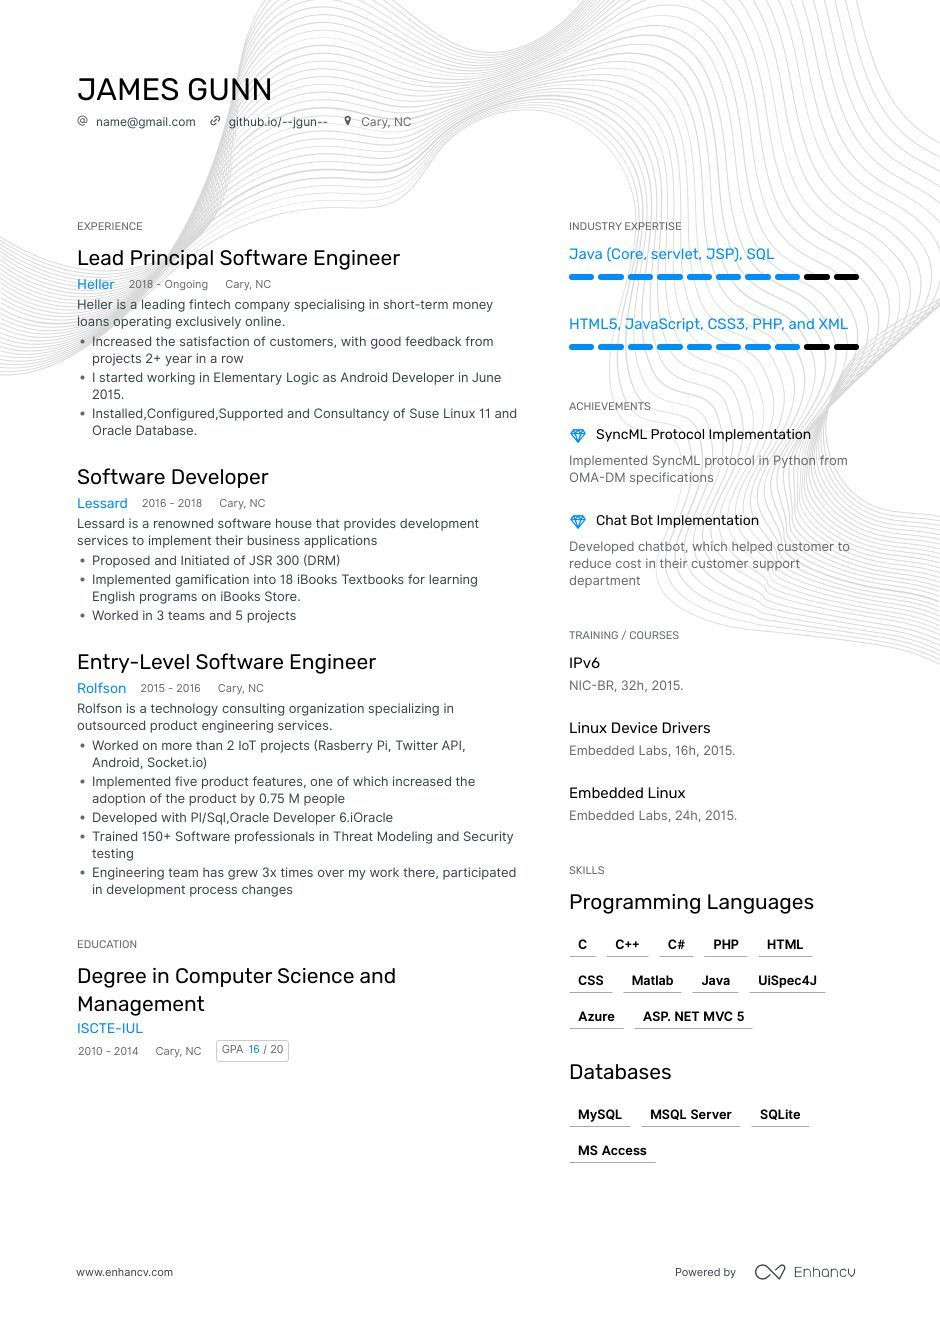 Sample Resume Headline for software Engineer with 2 Years Experience software Engineer Resume Examples & Guide for 2022 (layout, Skills …